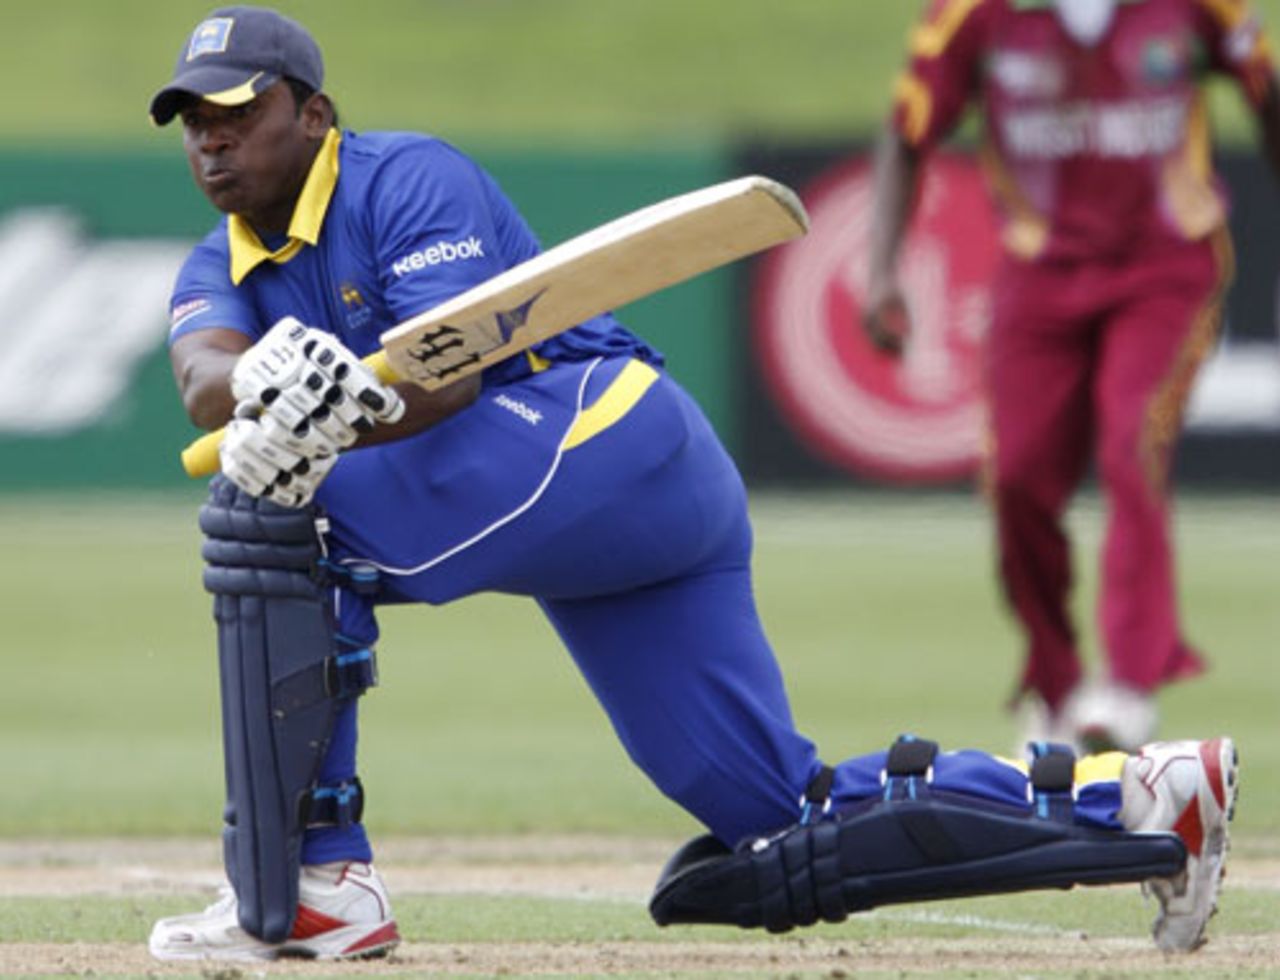 Denuwan Rajakaruna top scored with 94, Sri Lanka v West Indies, ICC Under-19 World Cup, 3rd place play-off, Christchurch, 29 January, 2010